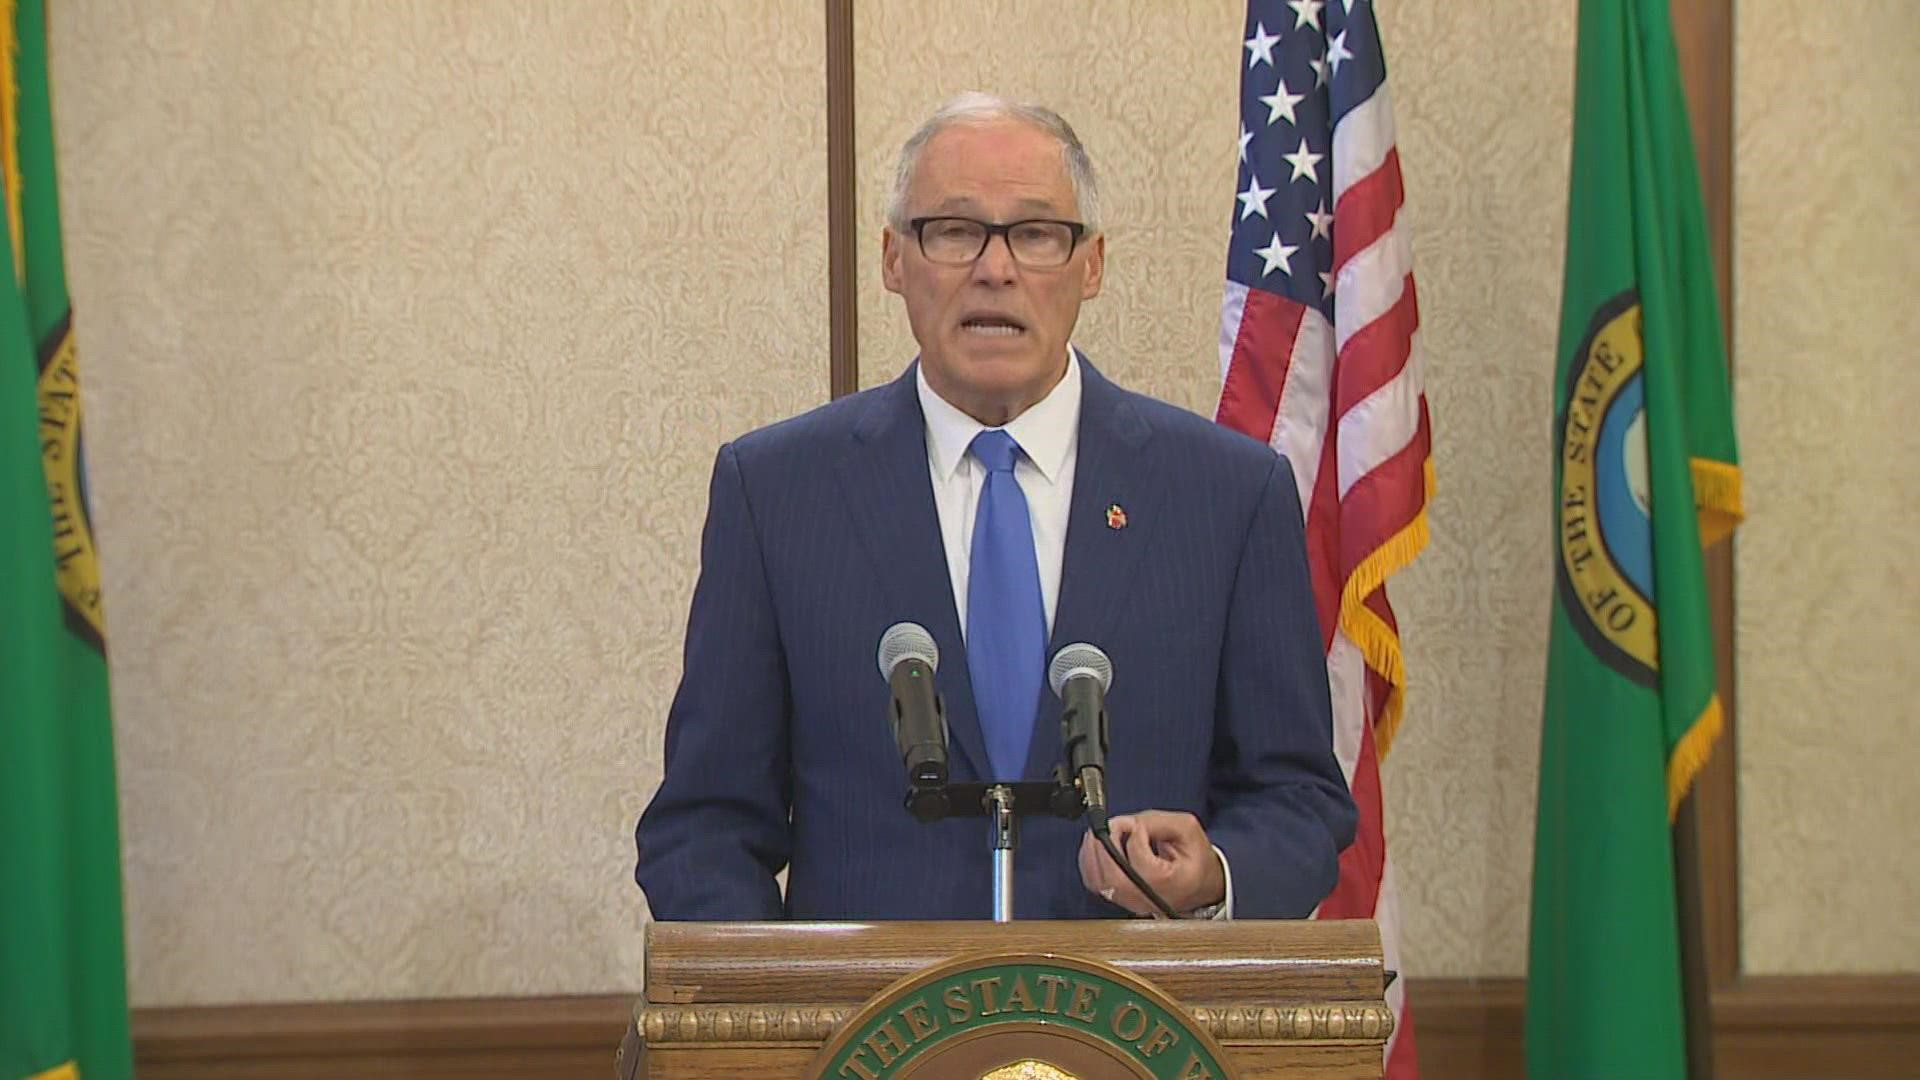 Gov. Jay Inslee unveiled his budget proposal Wednesday.